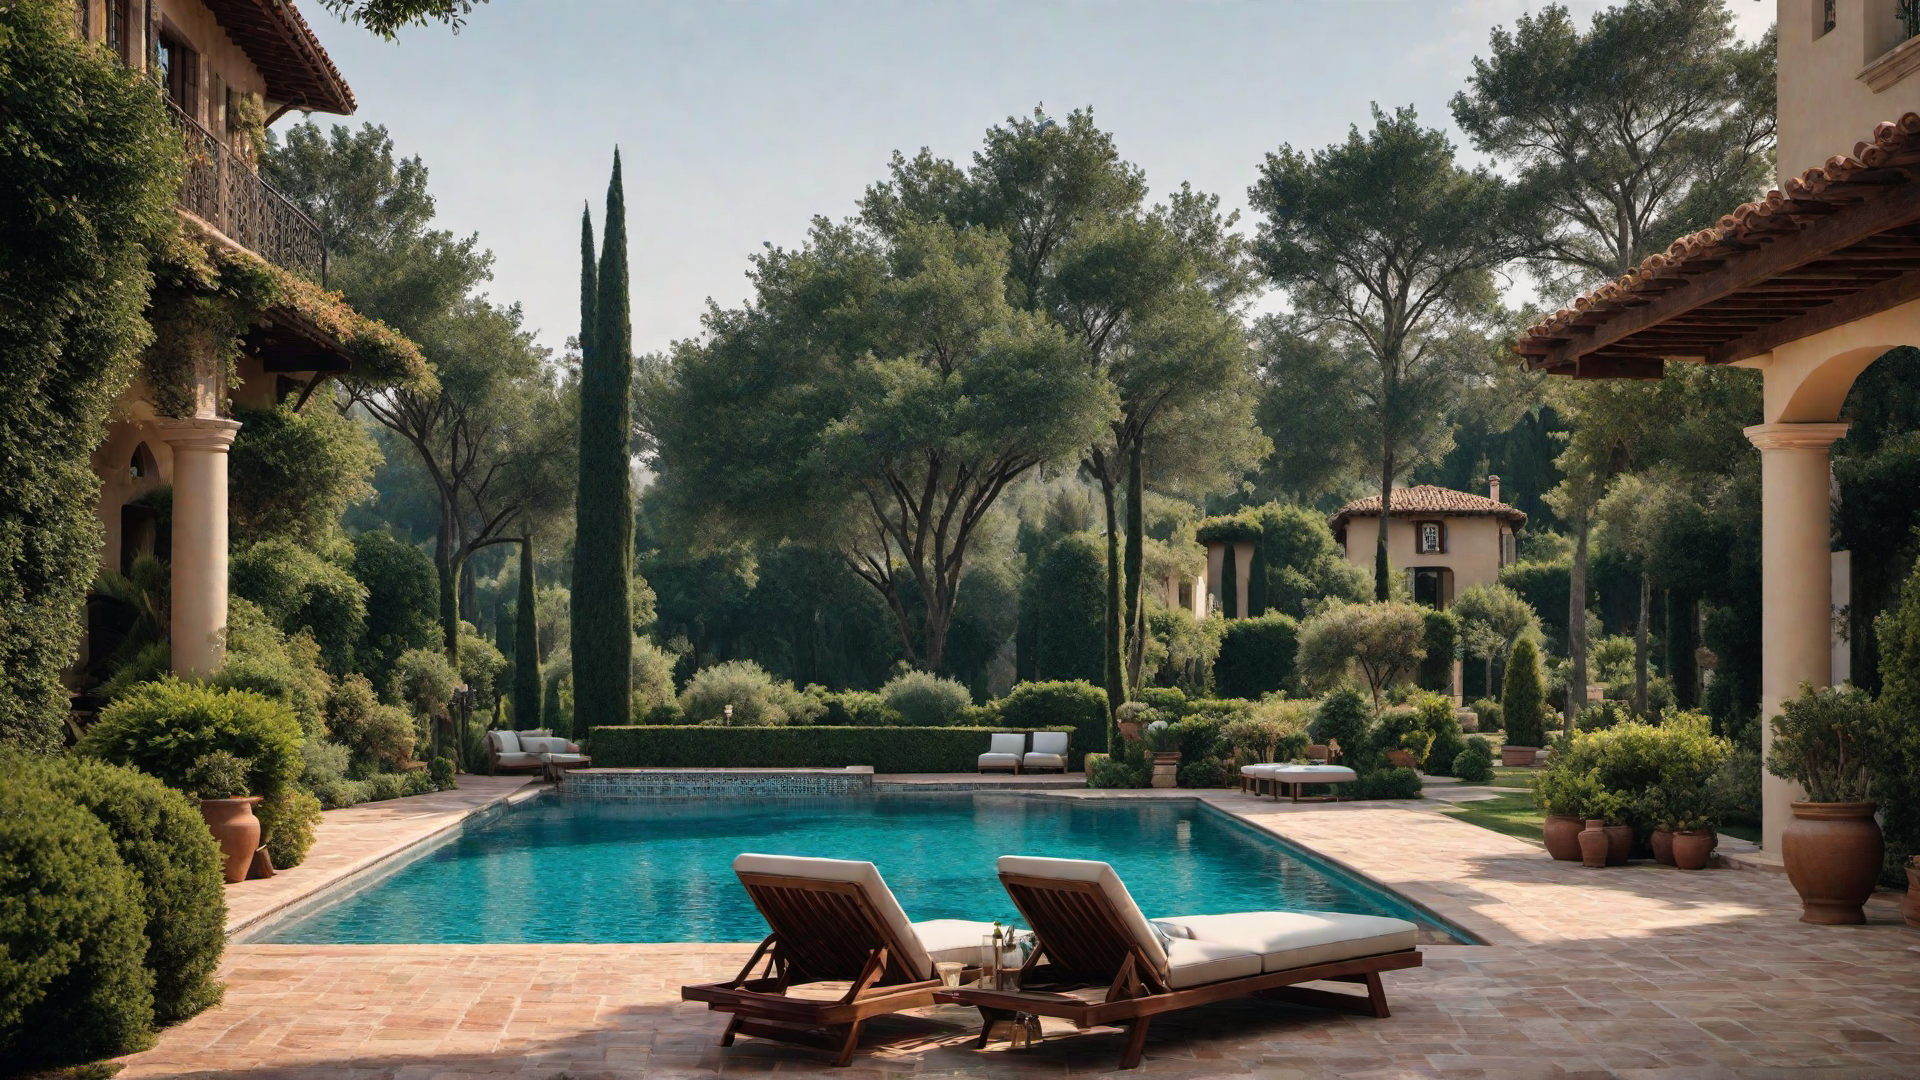 Tuscan Villa Style: Pool with Terracotta Tiles